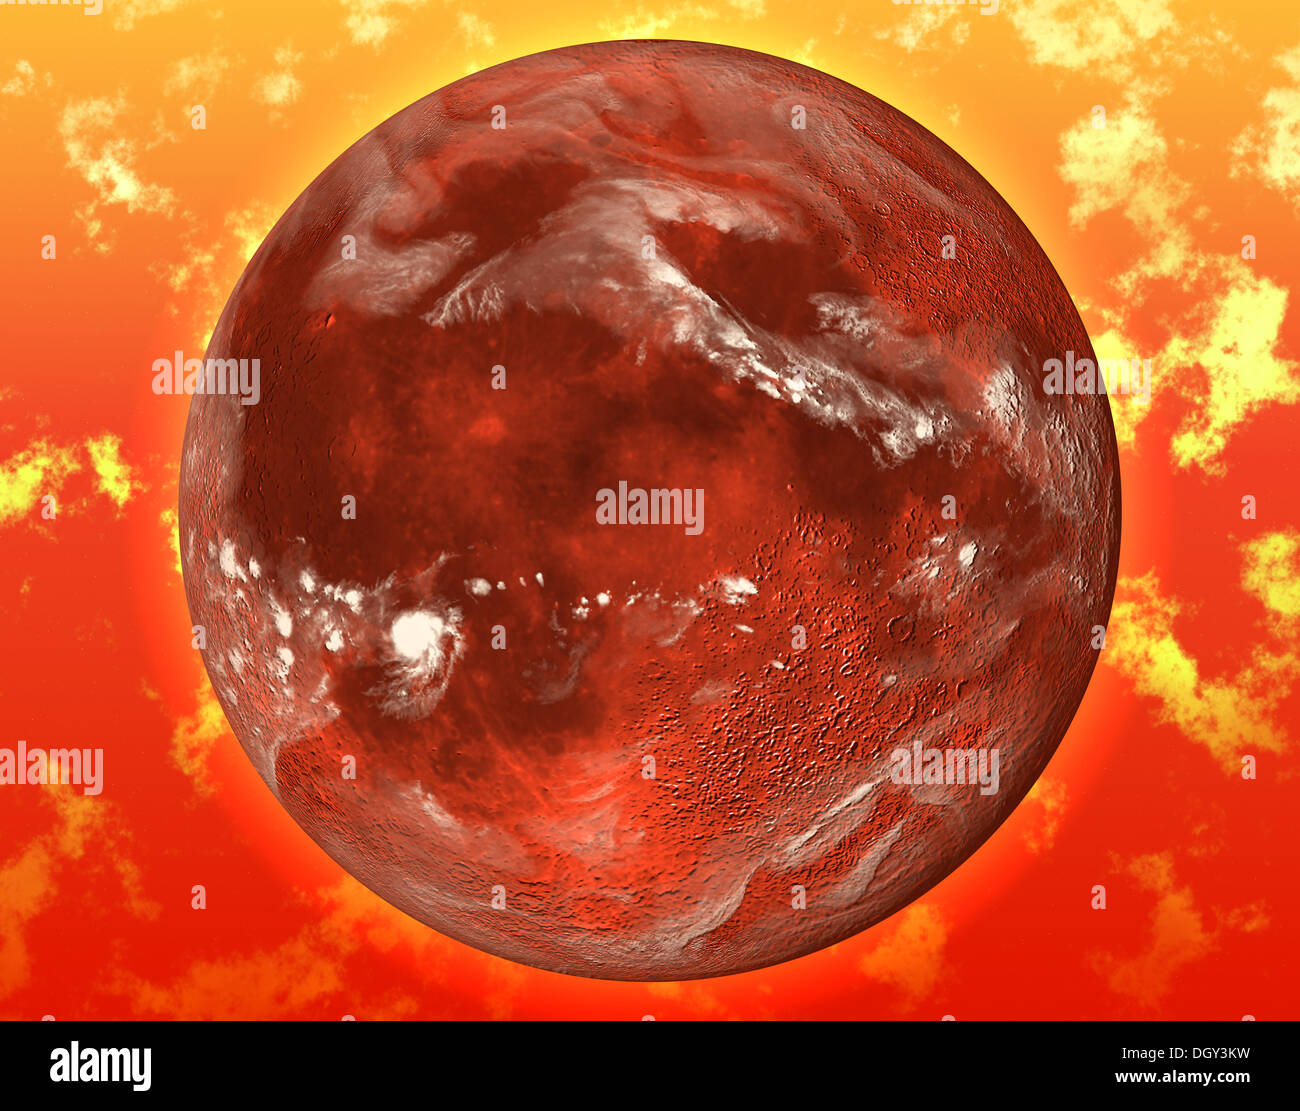 digitally created red planet Stock Photo